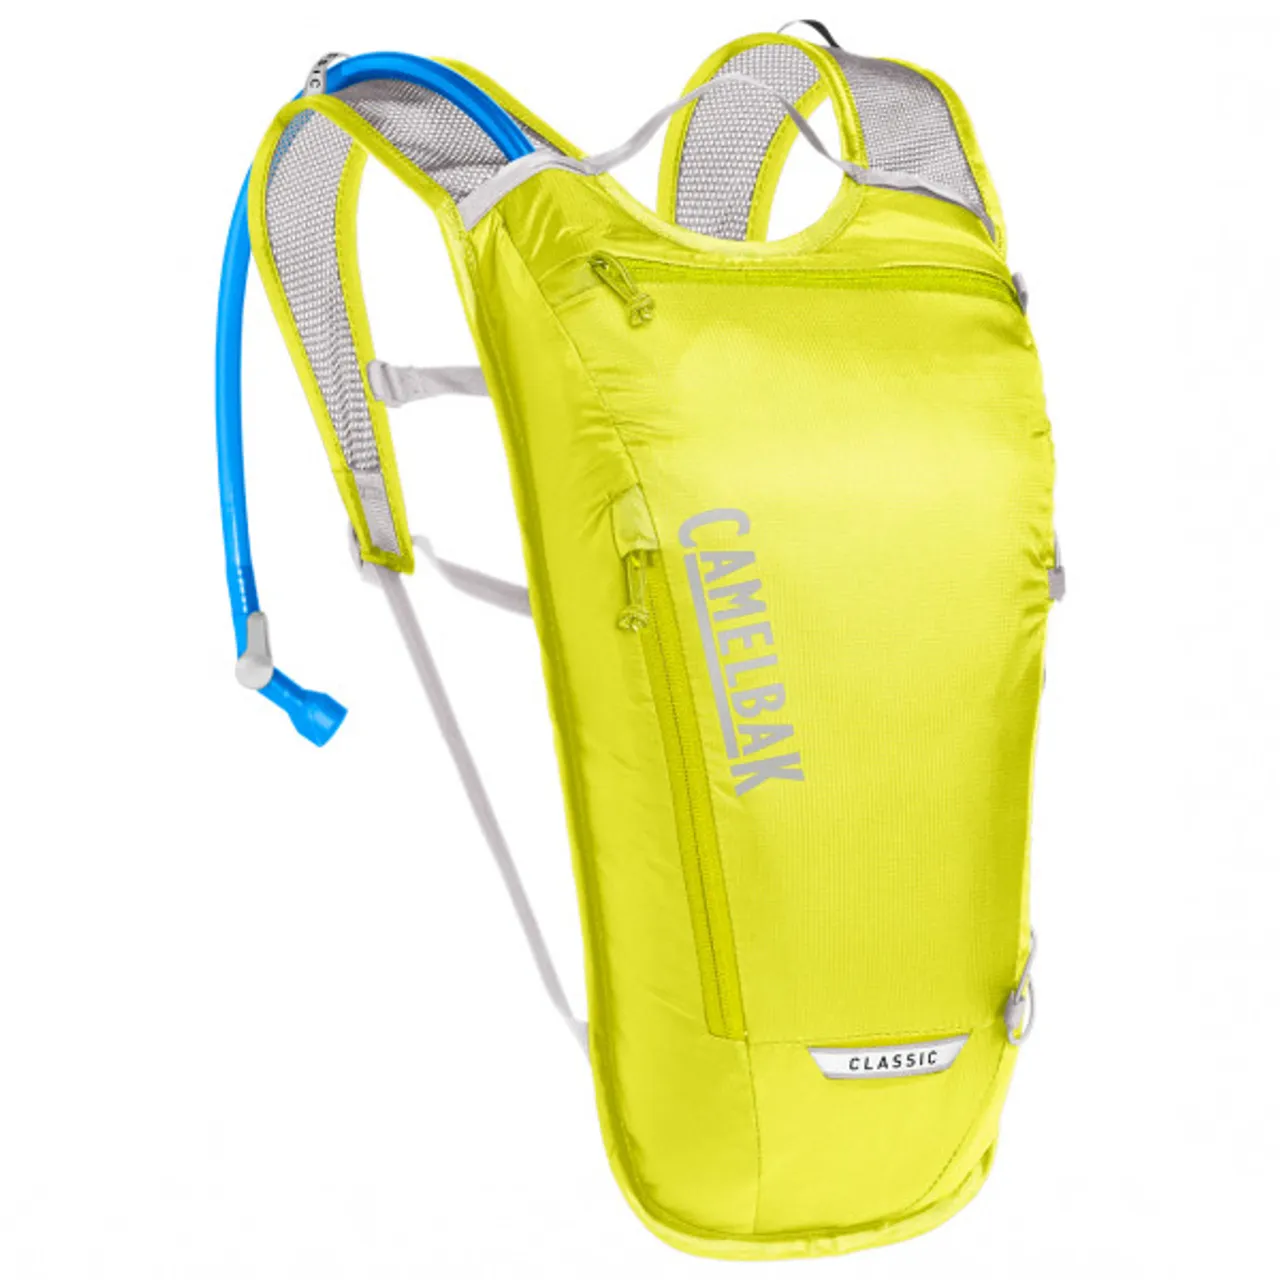 Camelbak - Classic Light 70oz - Cycling backpack size 2 l, yellow